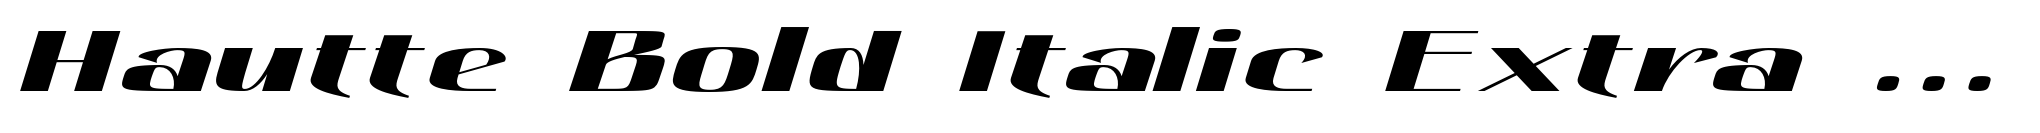 Hautte Bold Italic Extra Expanded image